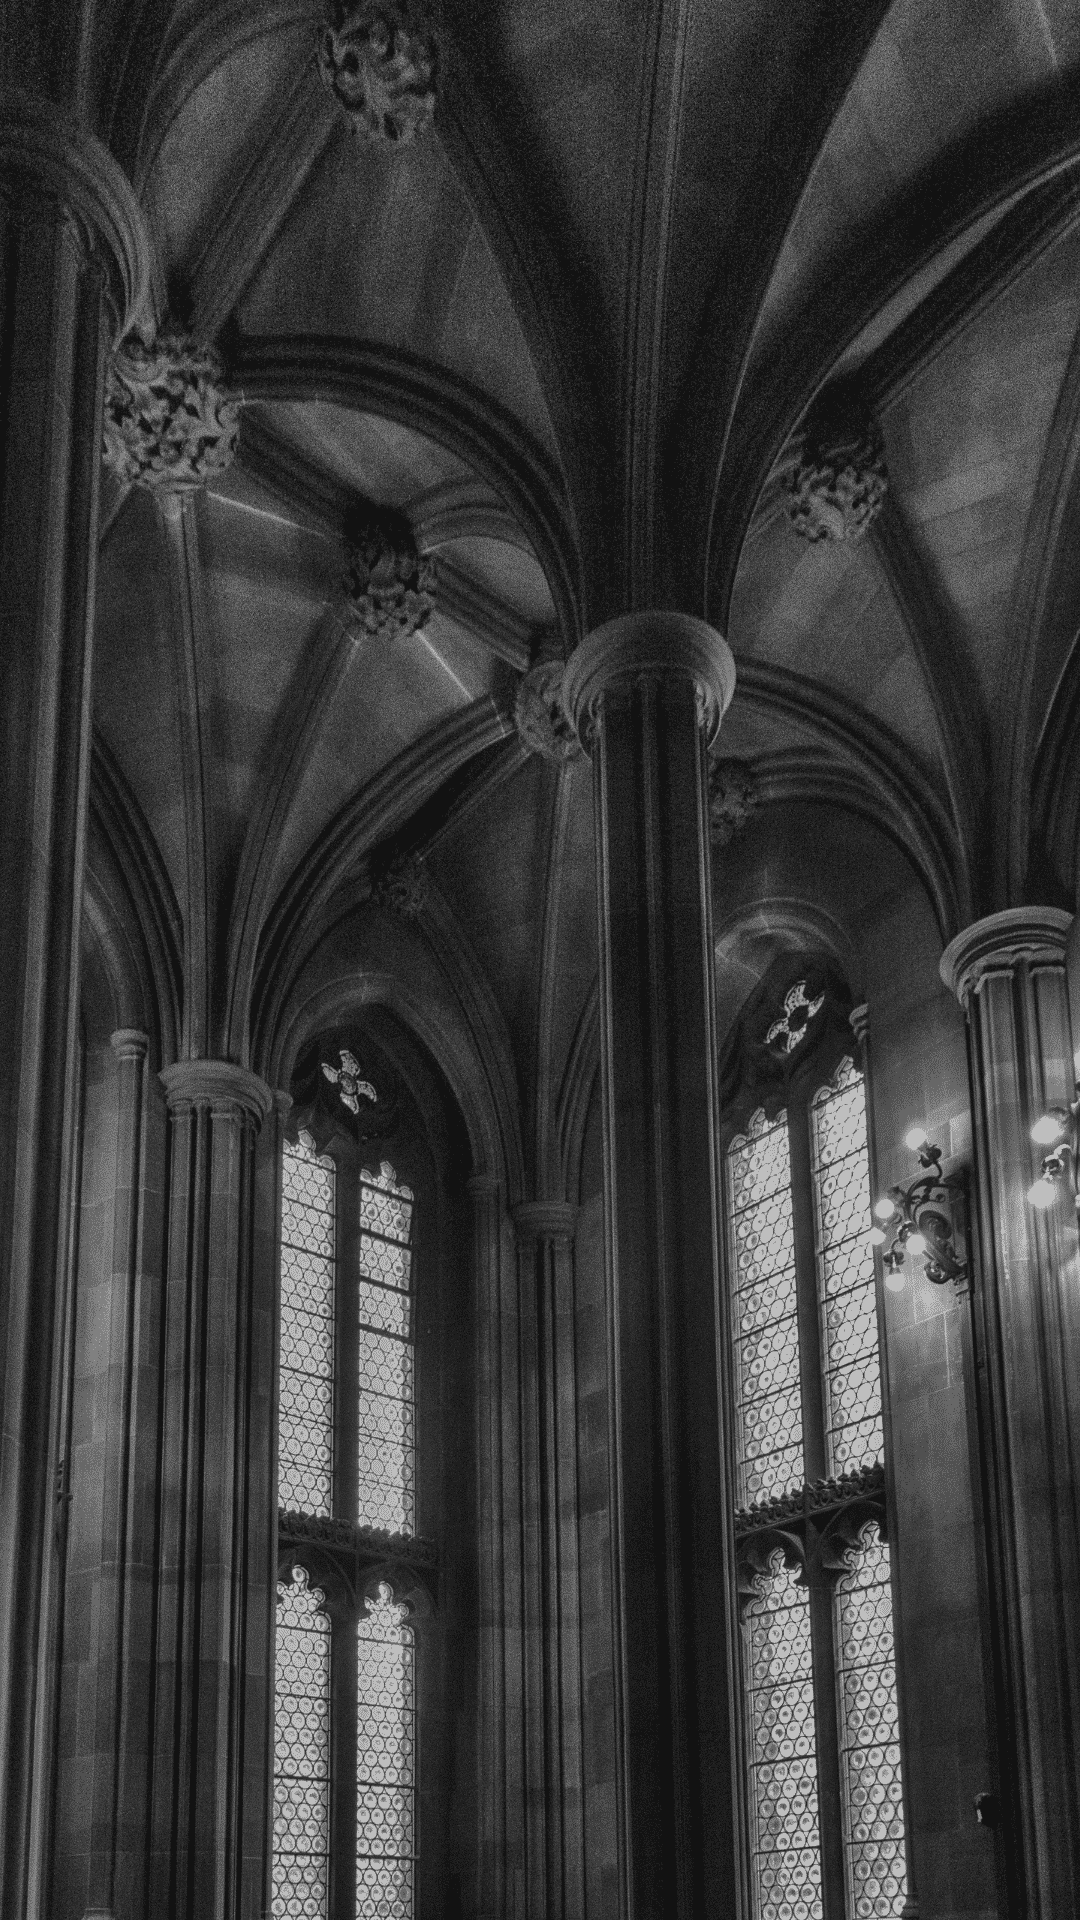 A black and white photo of a cathedral with high arched windows - Slytherin, Hogwarts